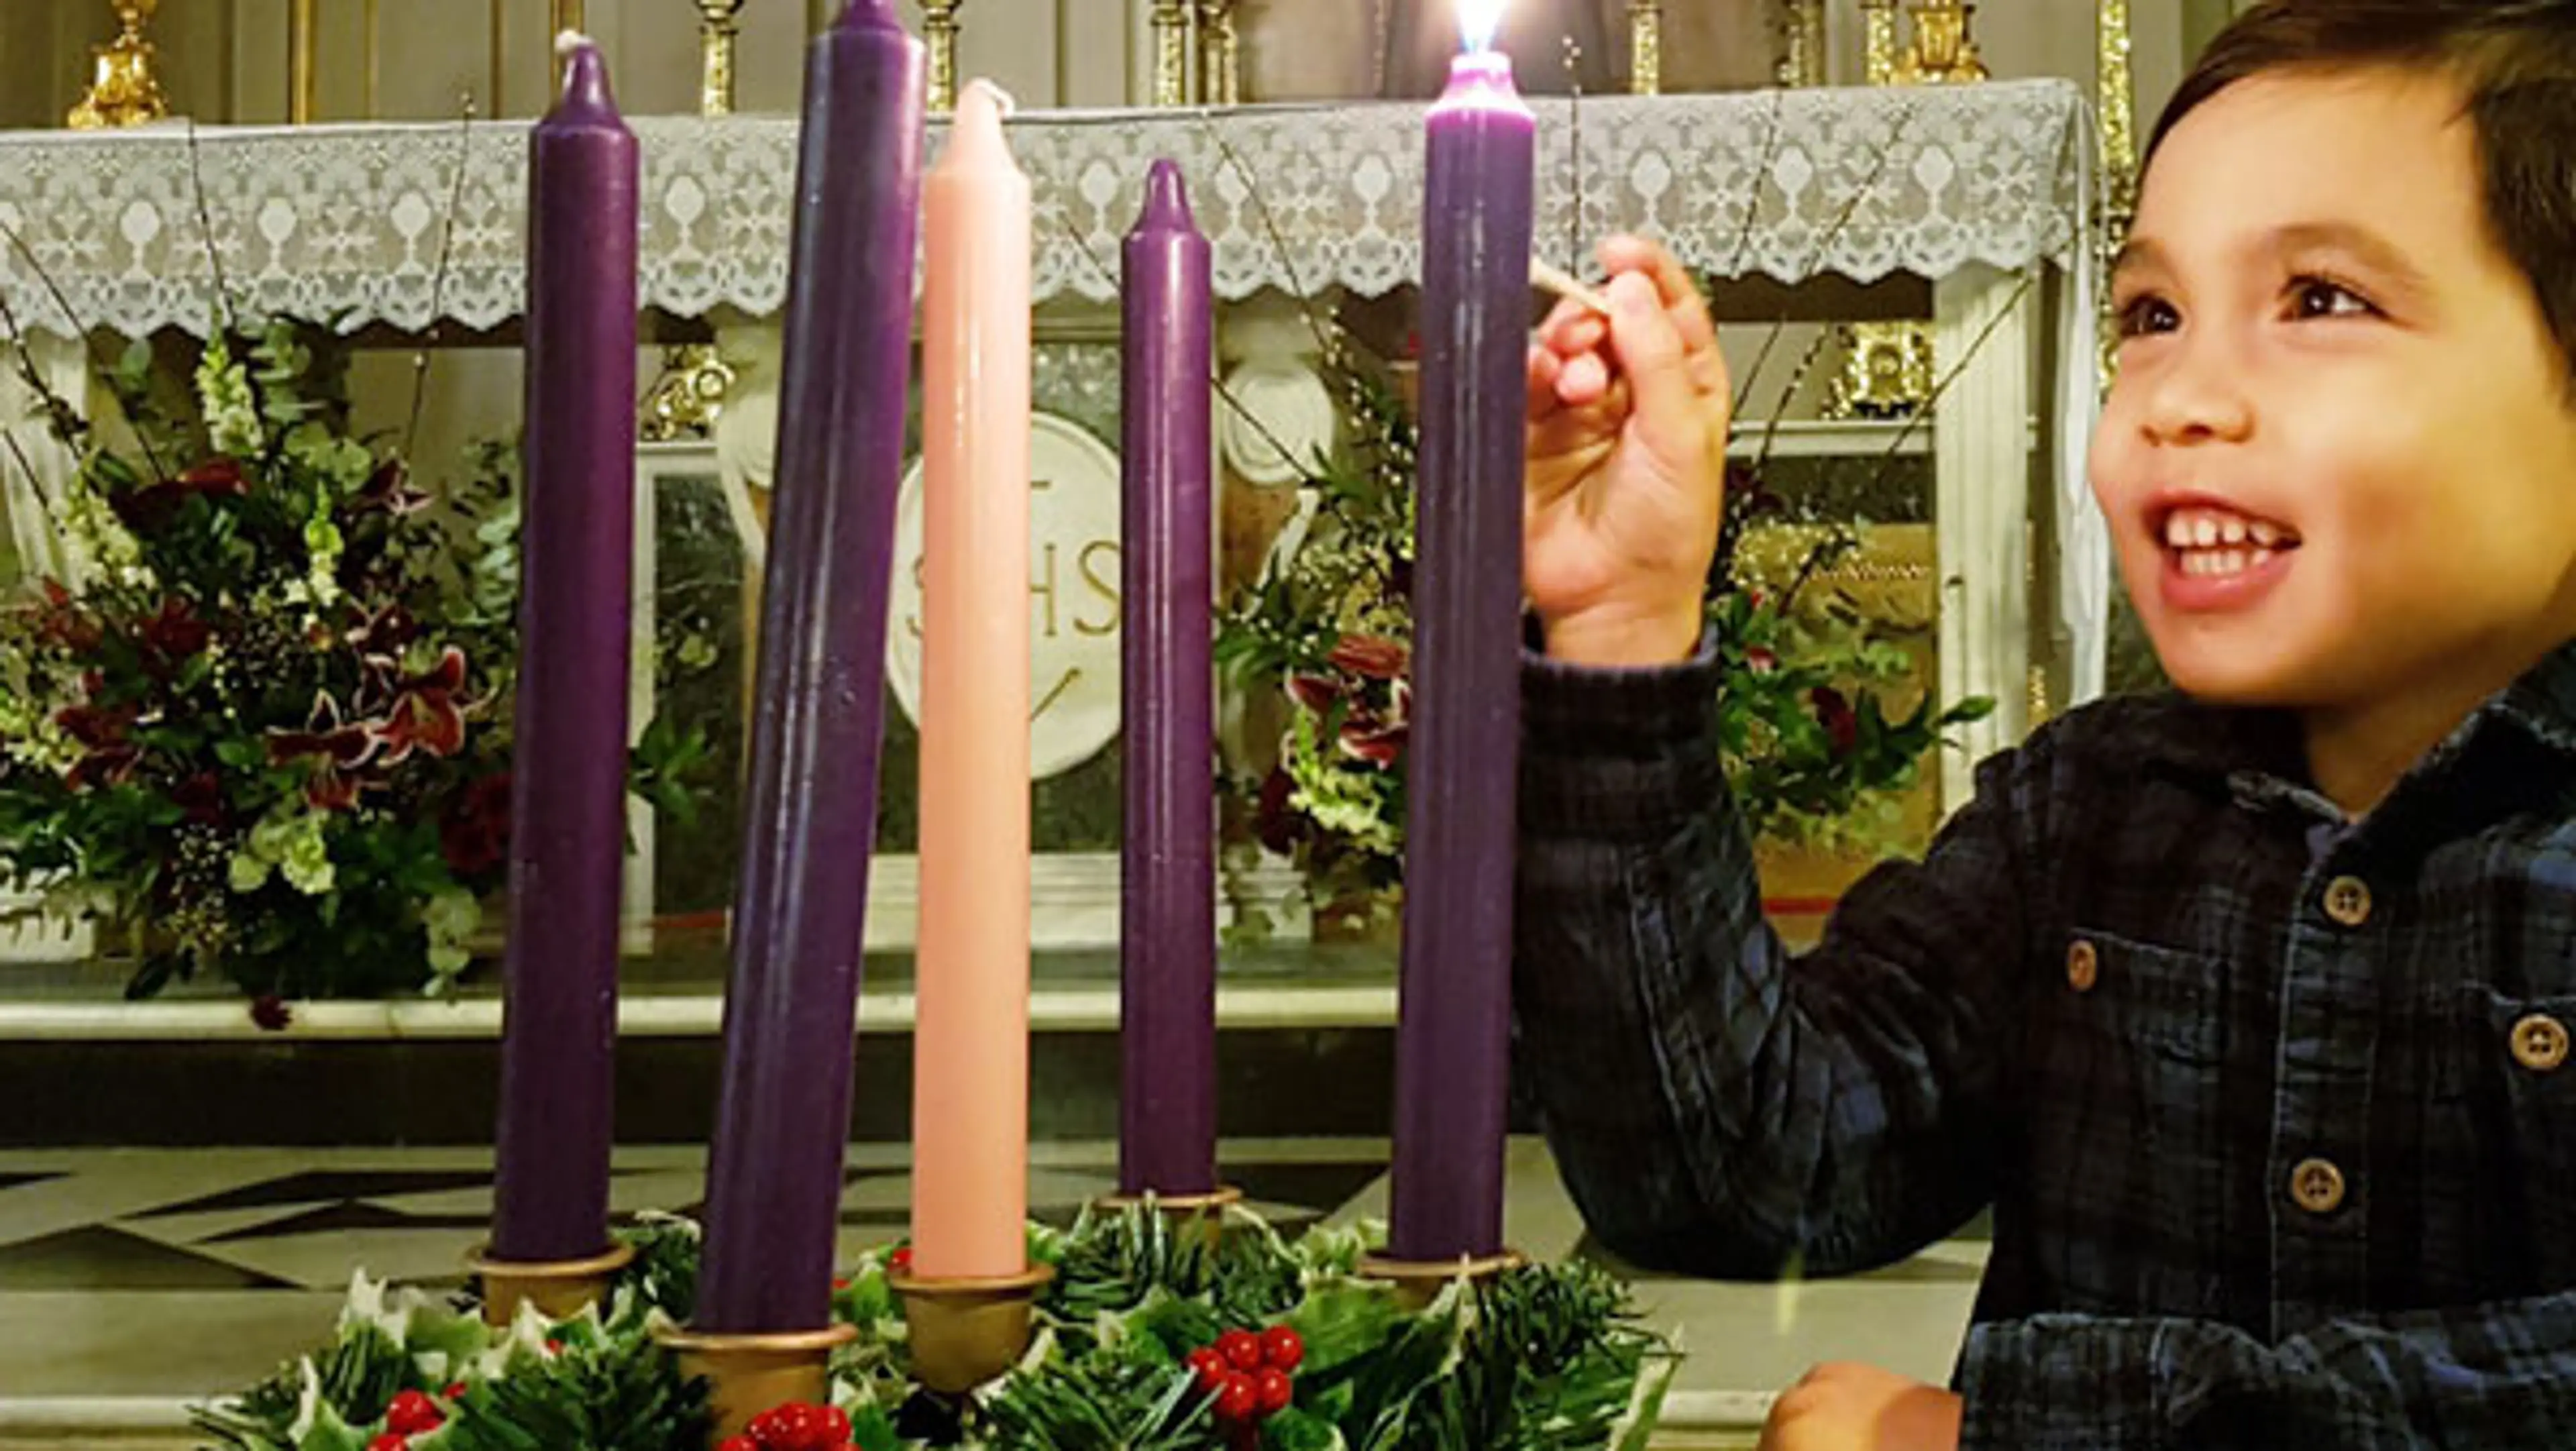 Boy lighting an advent candle